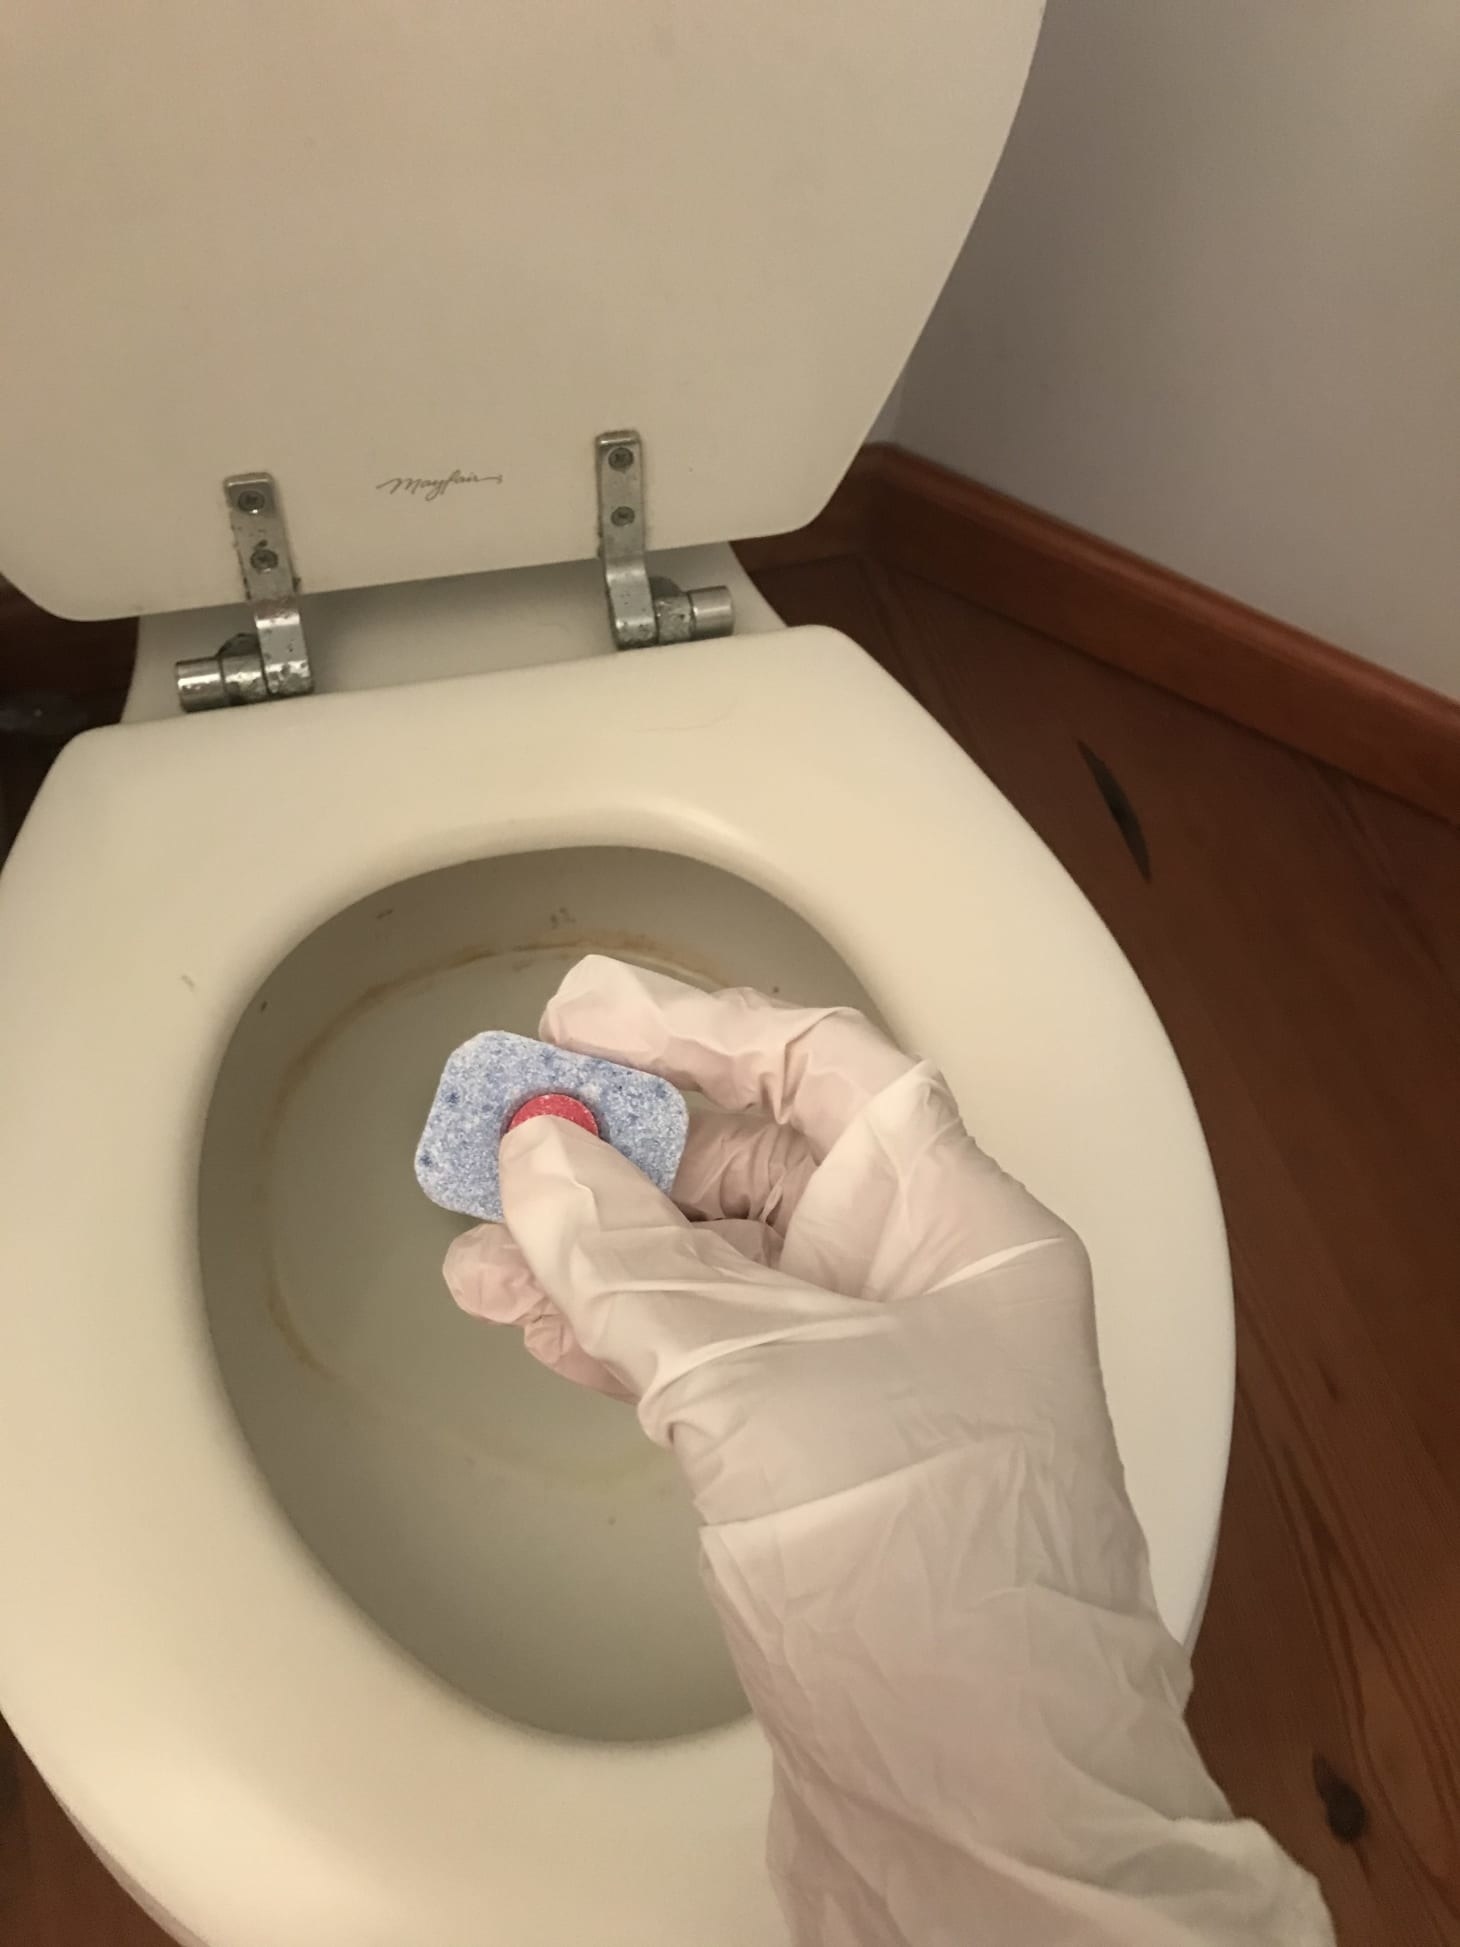 Using a dishwasher tablet to clean toilet bowl